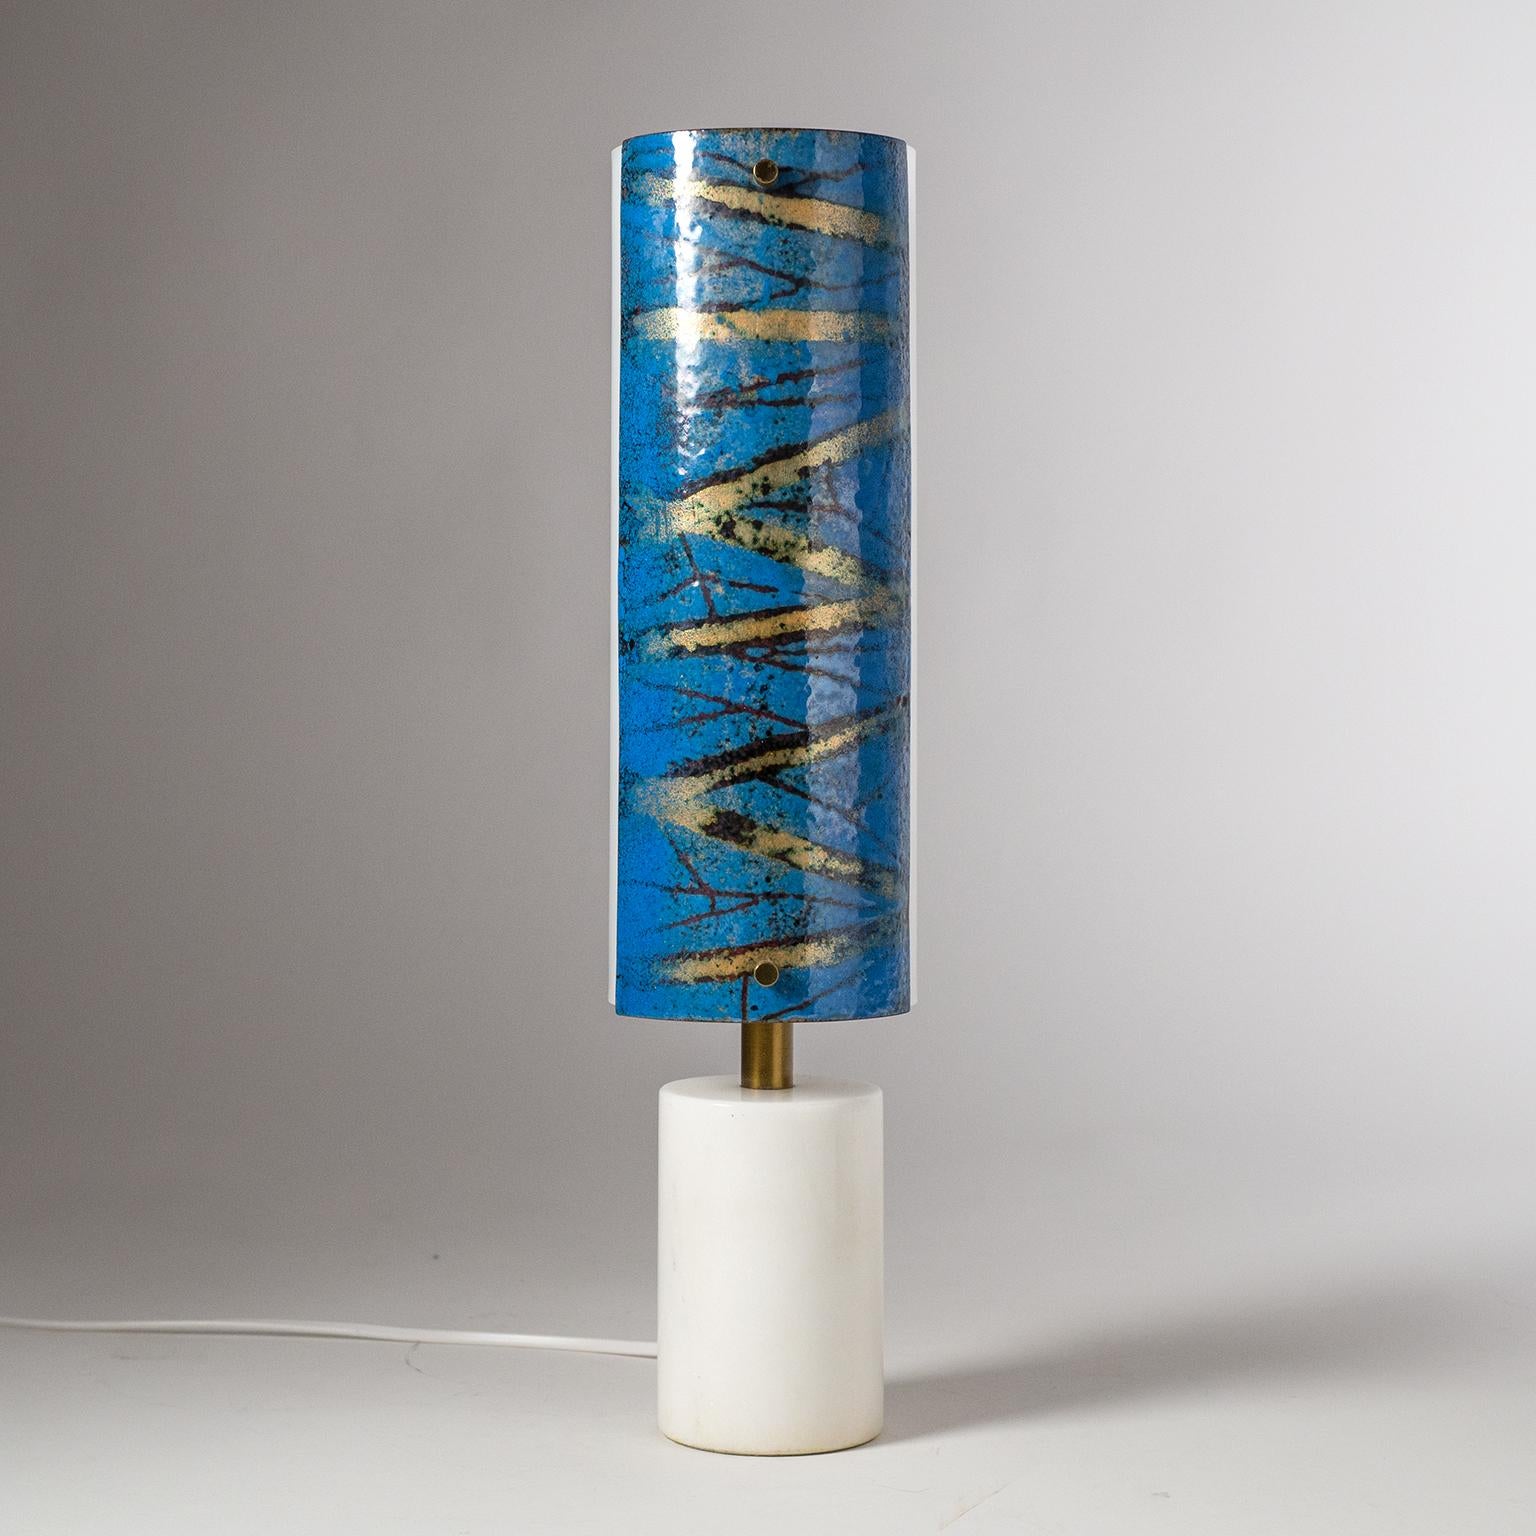 Mid-20th Century Rare Italian Table Lamp, 1950s, Marble and Enameled Copper  For Sale